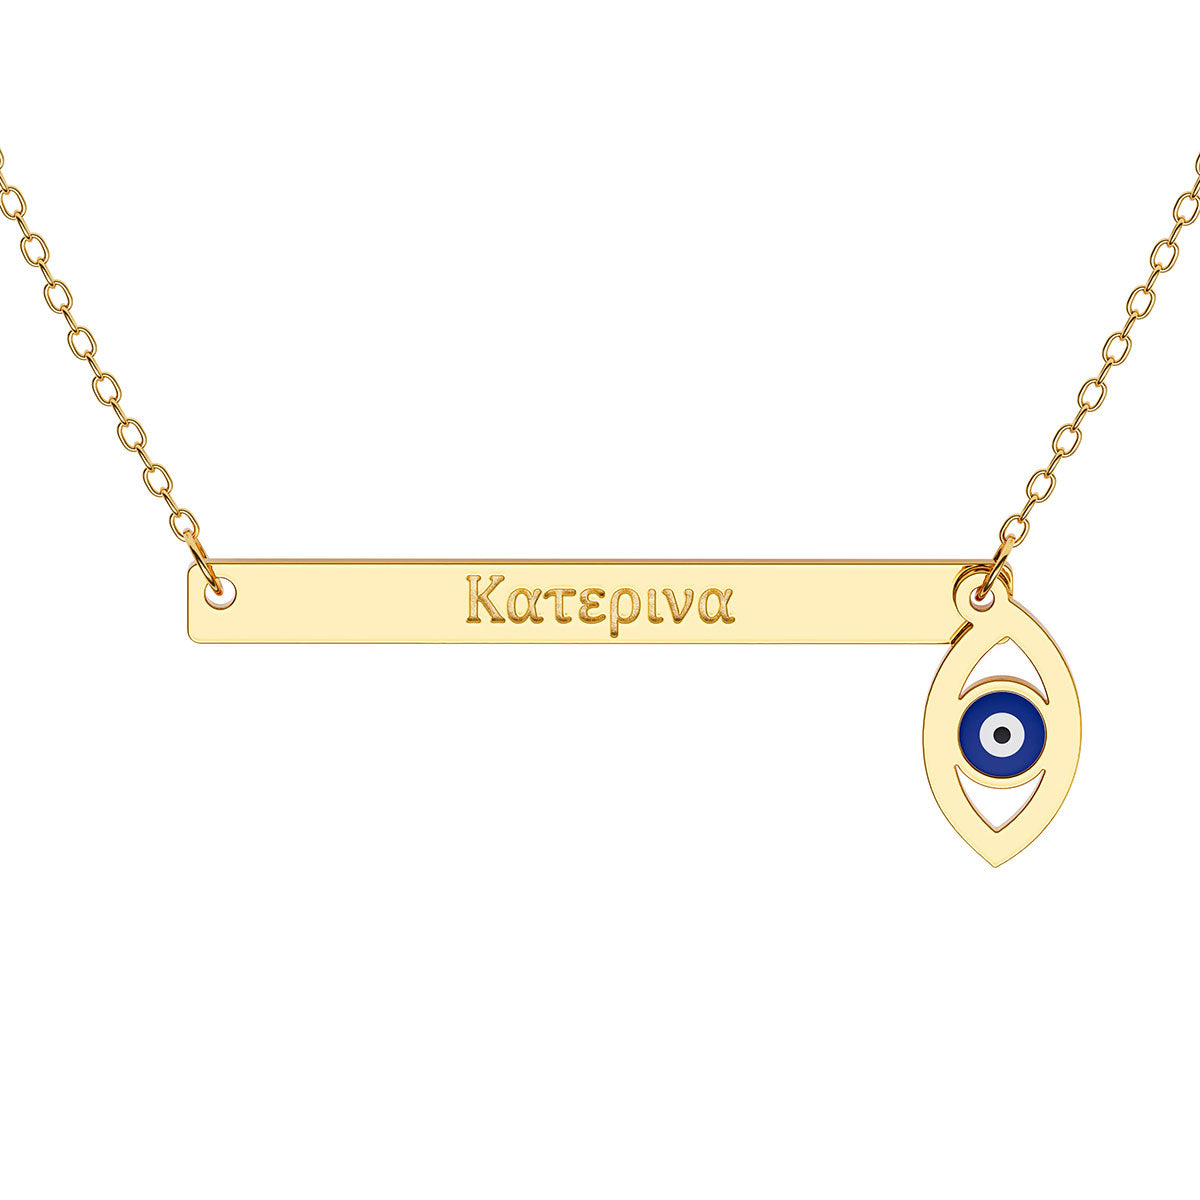 Narrow Horizontal Bar Necklace with Greek Engraving and Evil Eye Charm